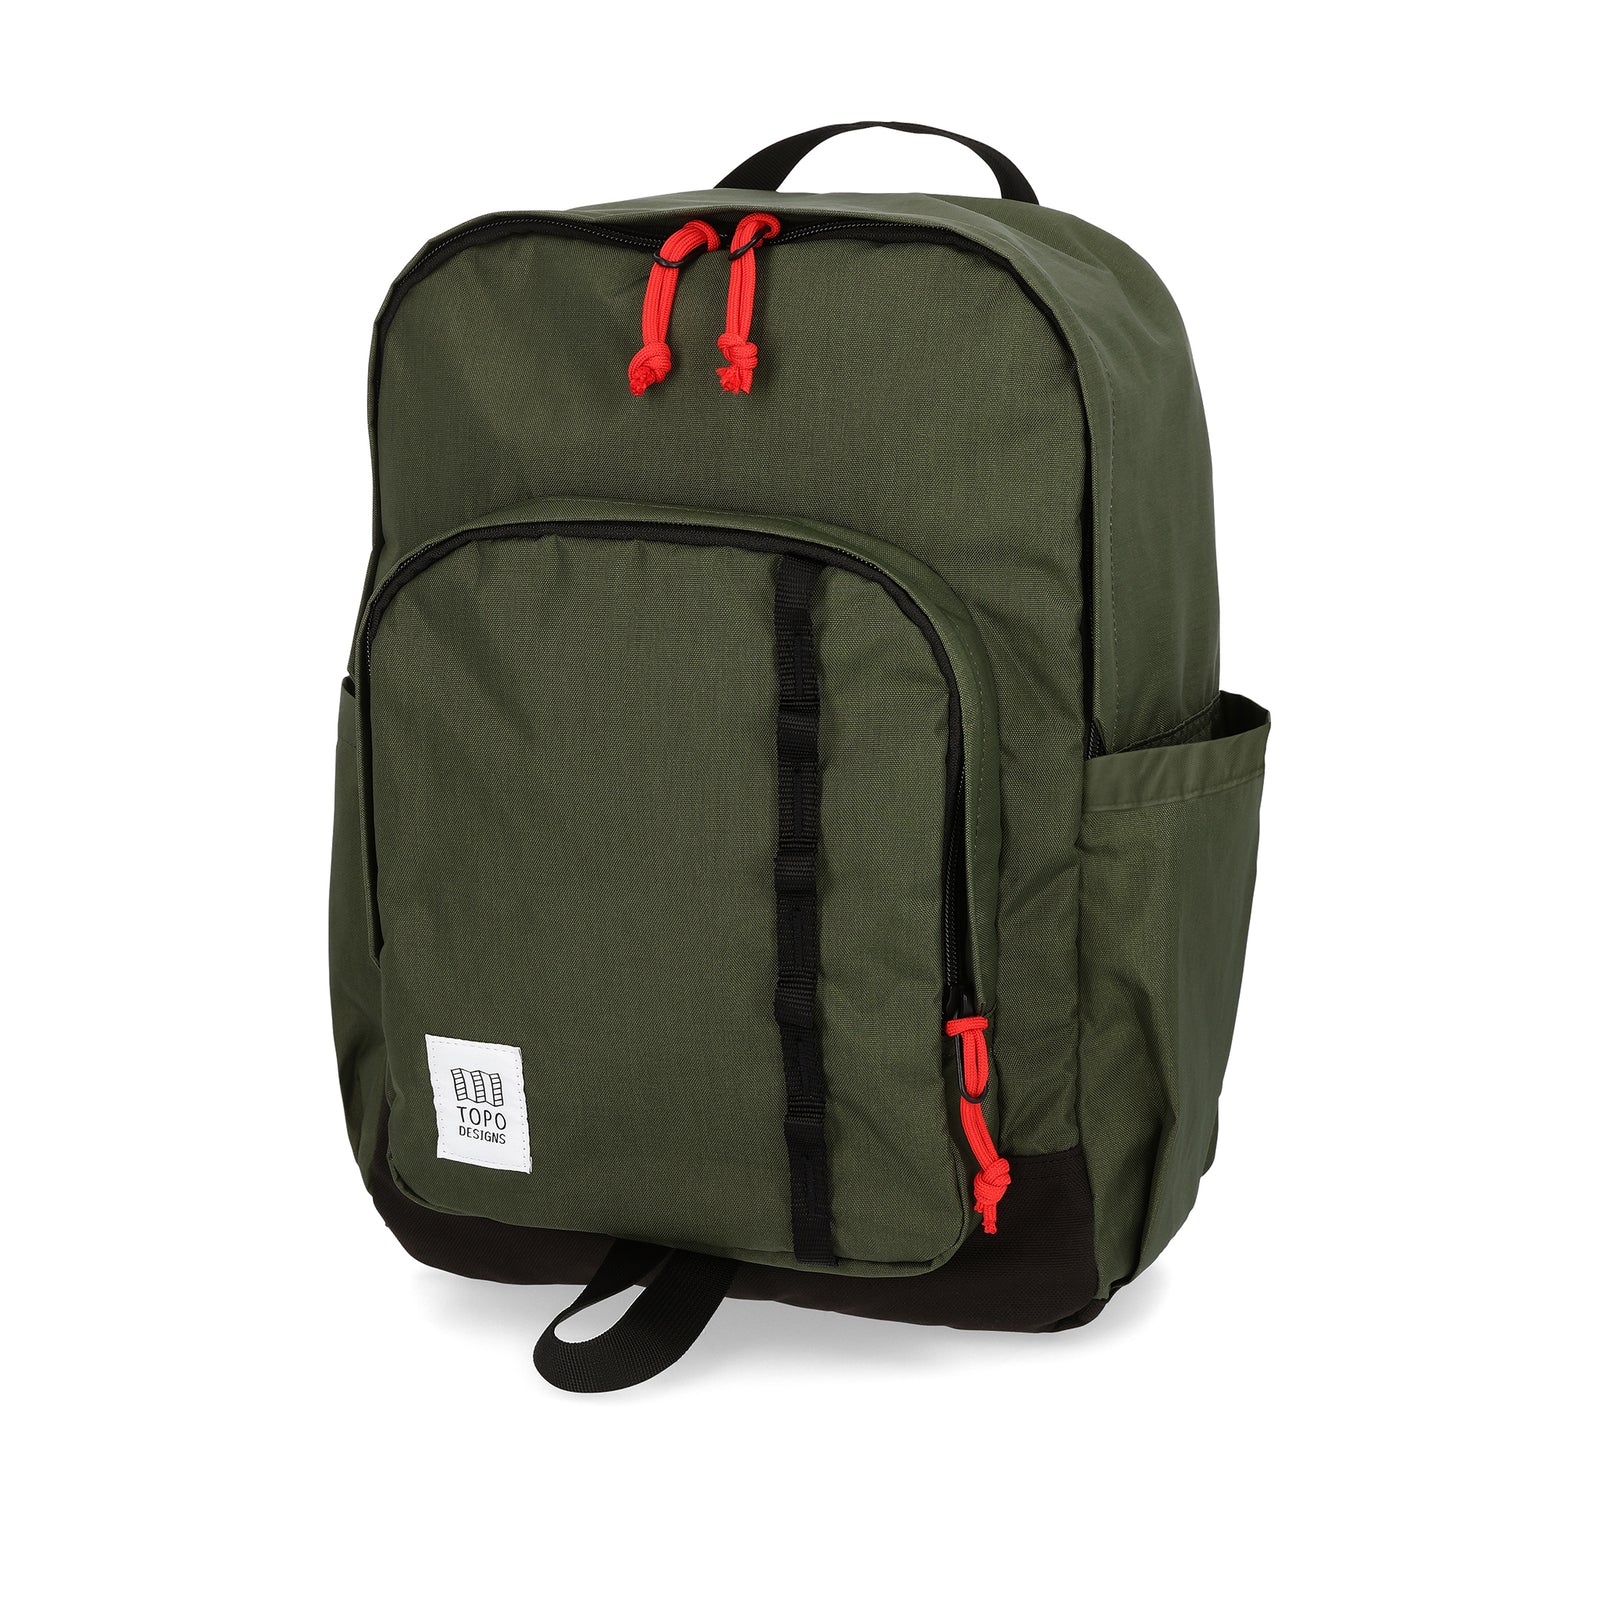 Topo Designs Session Pack laptop backpack in "Olive"